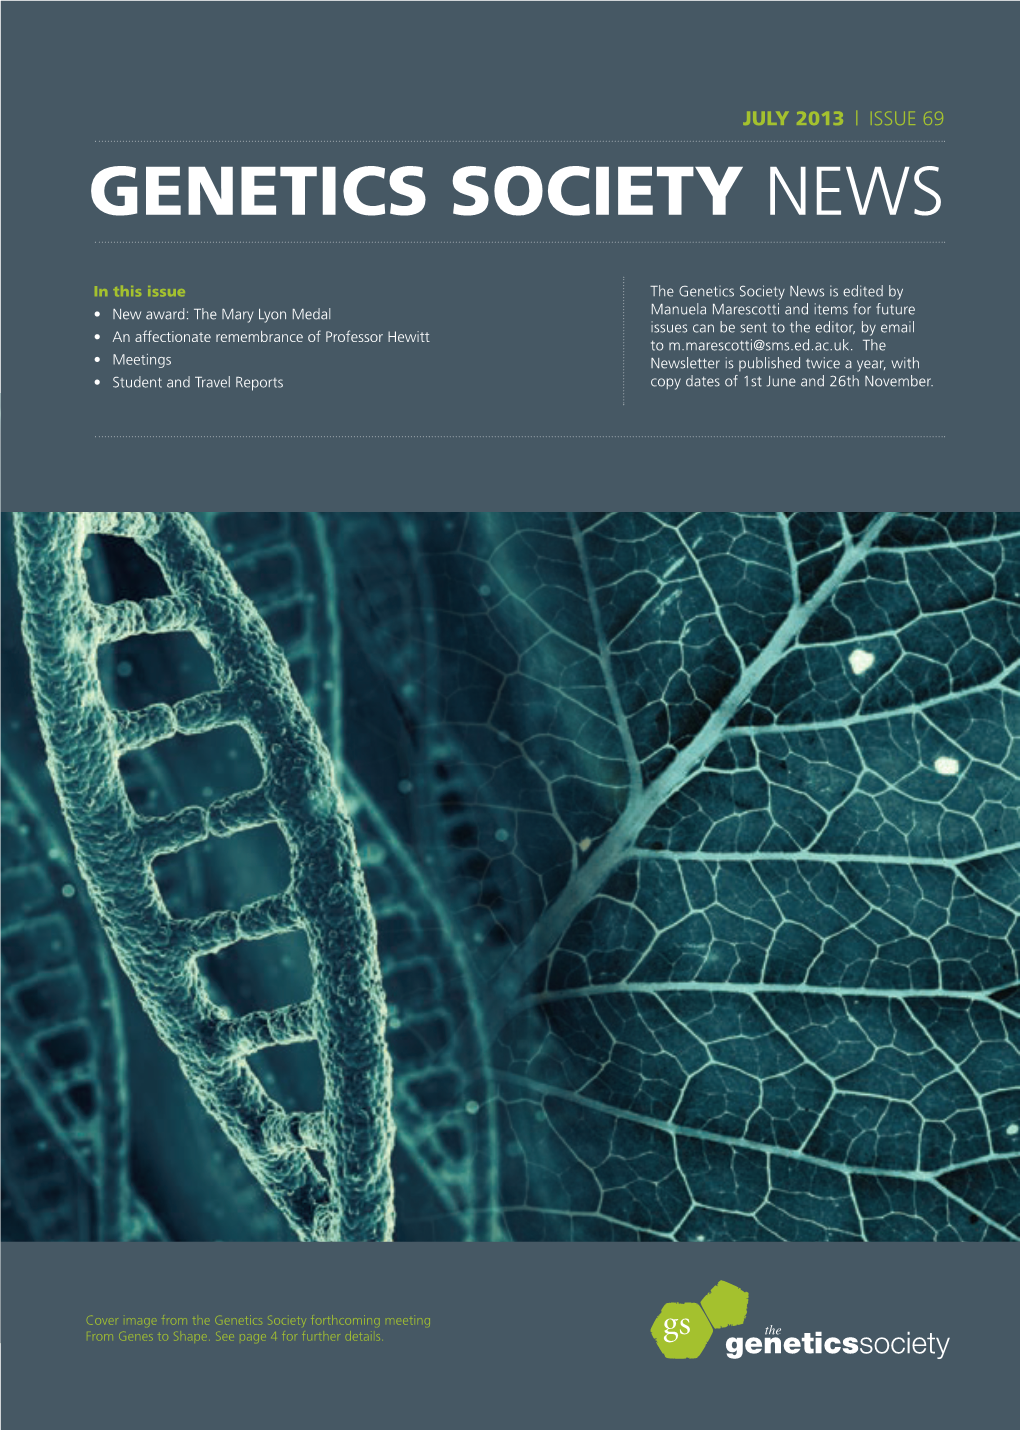 Issue 69 of the Genetics Society Newsletter